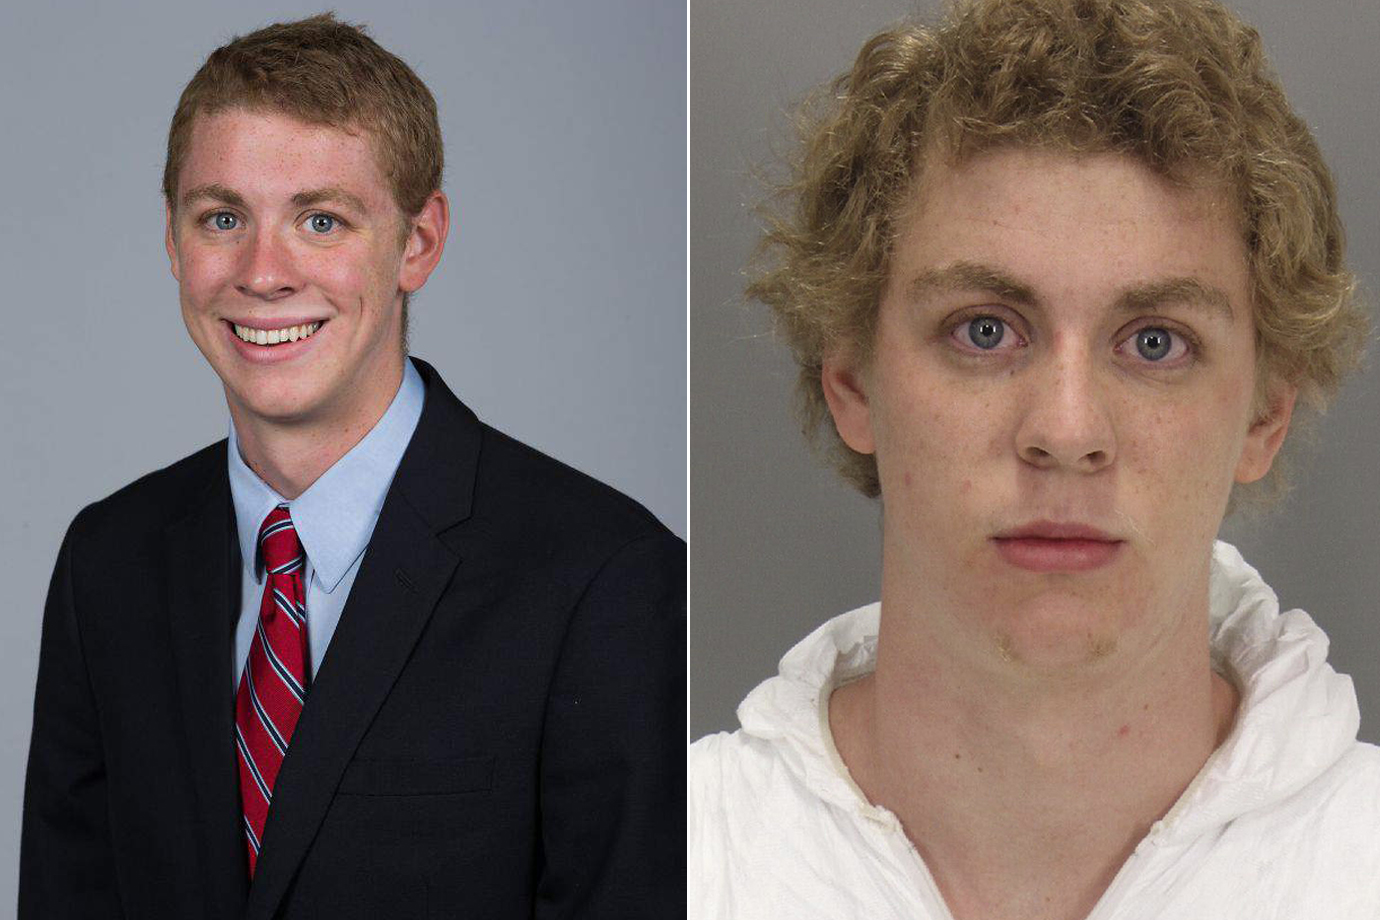 A composite image showing a Stanford University photo of Brock Turner (left) and Turner's January 2015 booking photo, released in June by the Santa Clara County Sheriff's Office.